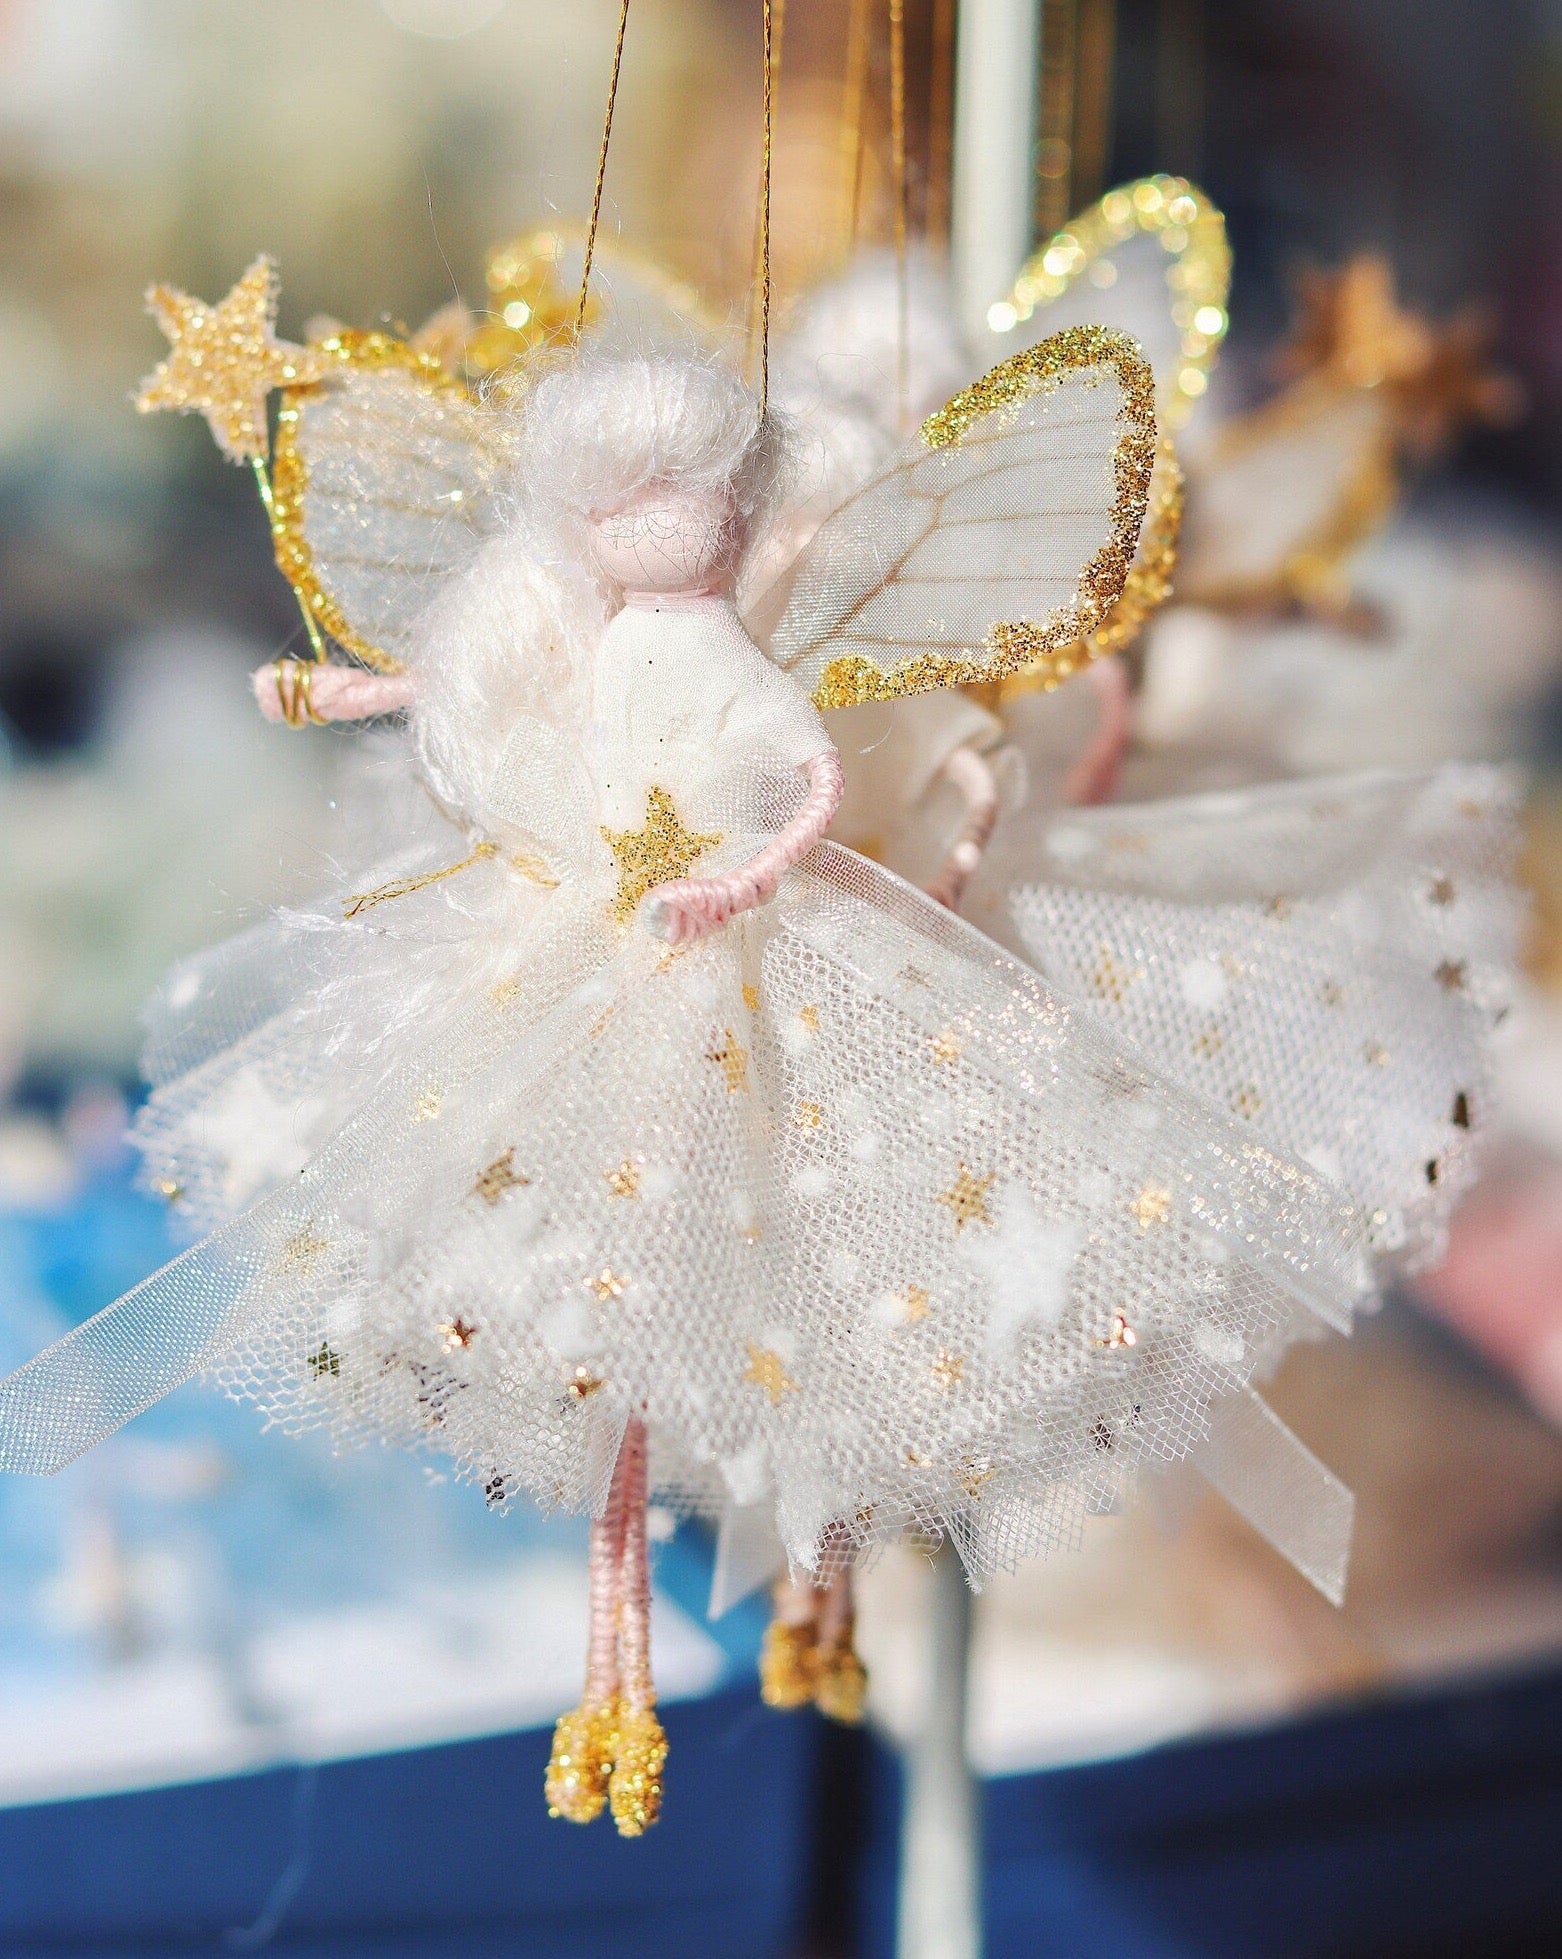 A perfect gift for Christmas or an addition to your Christmas tree. This Fairy is a unique, one-of-a-kind product, handmade by a bridal designer from all her cherished fabrics. It is an item to treasure, a special family heirloom.